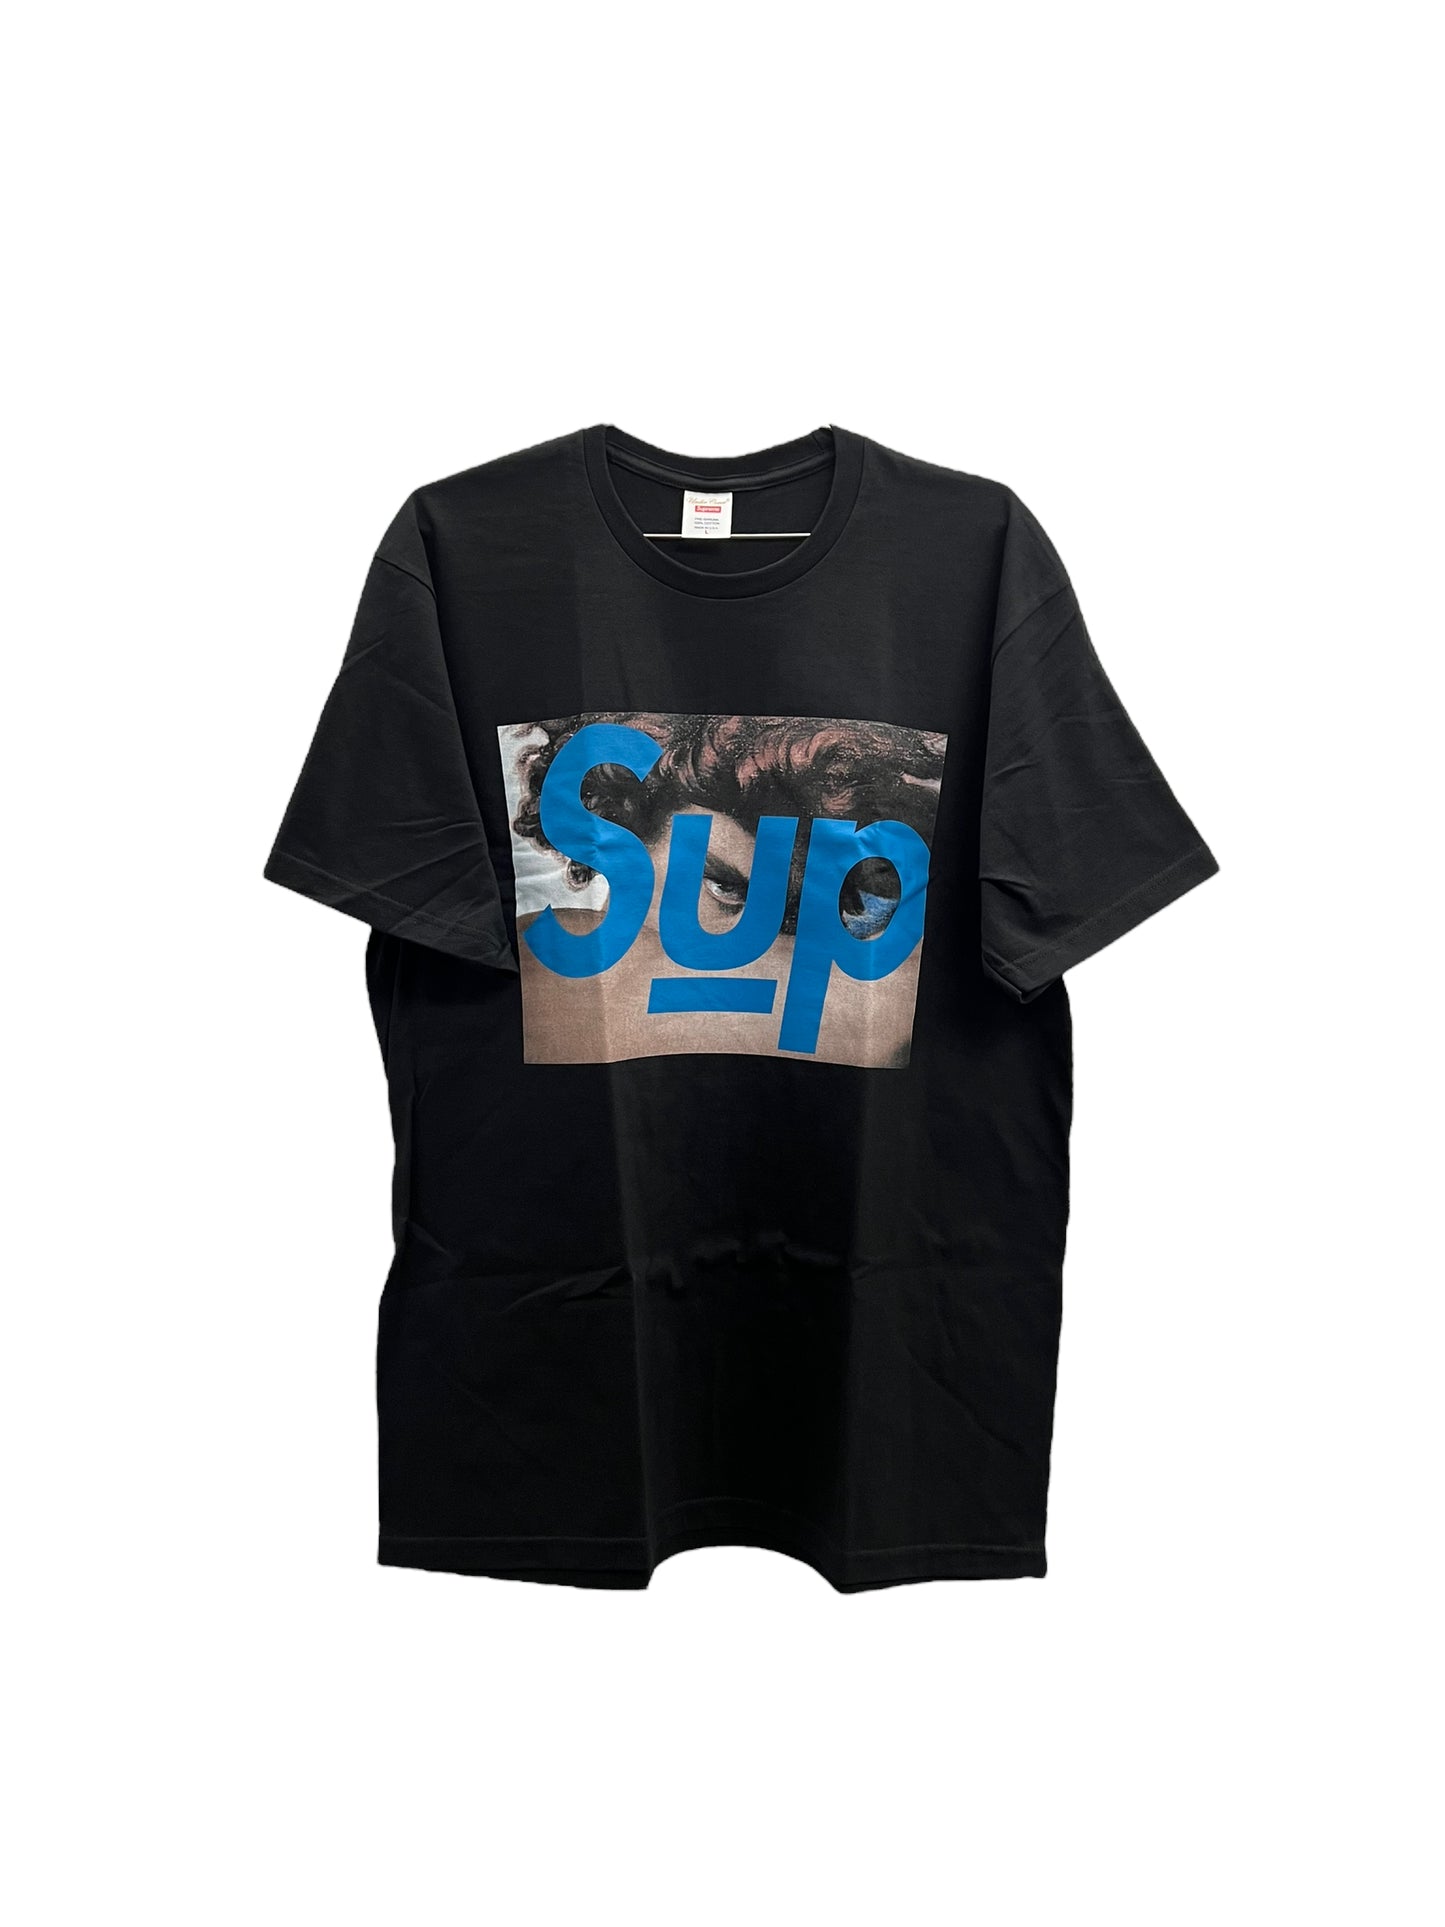 Supreme/UNDERCOVER Face Tee